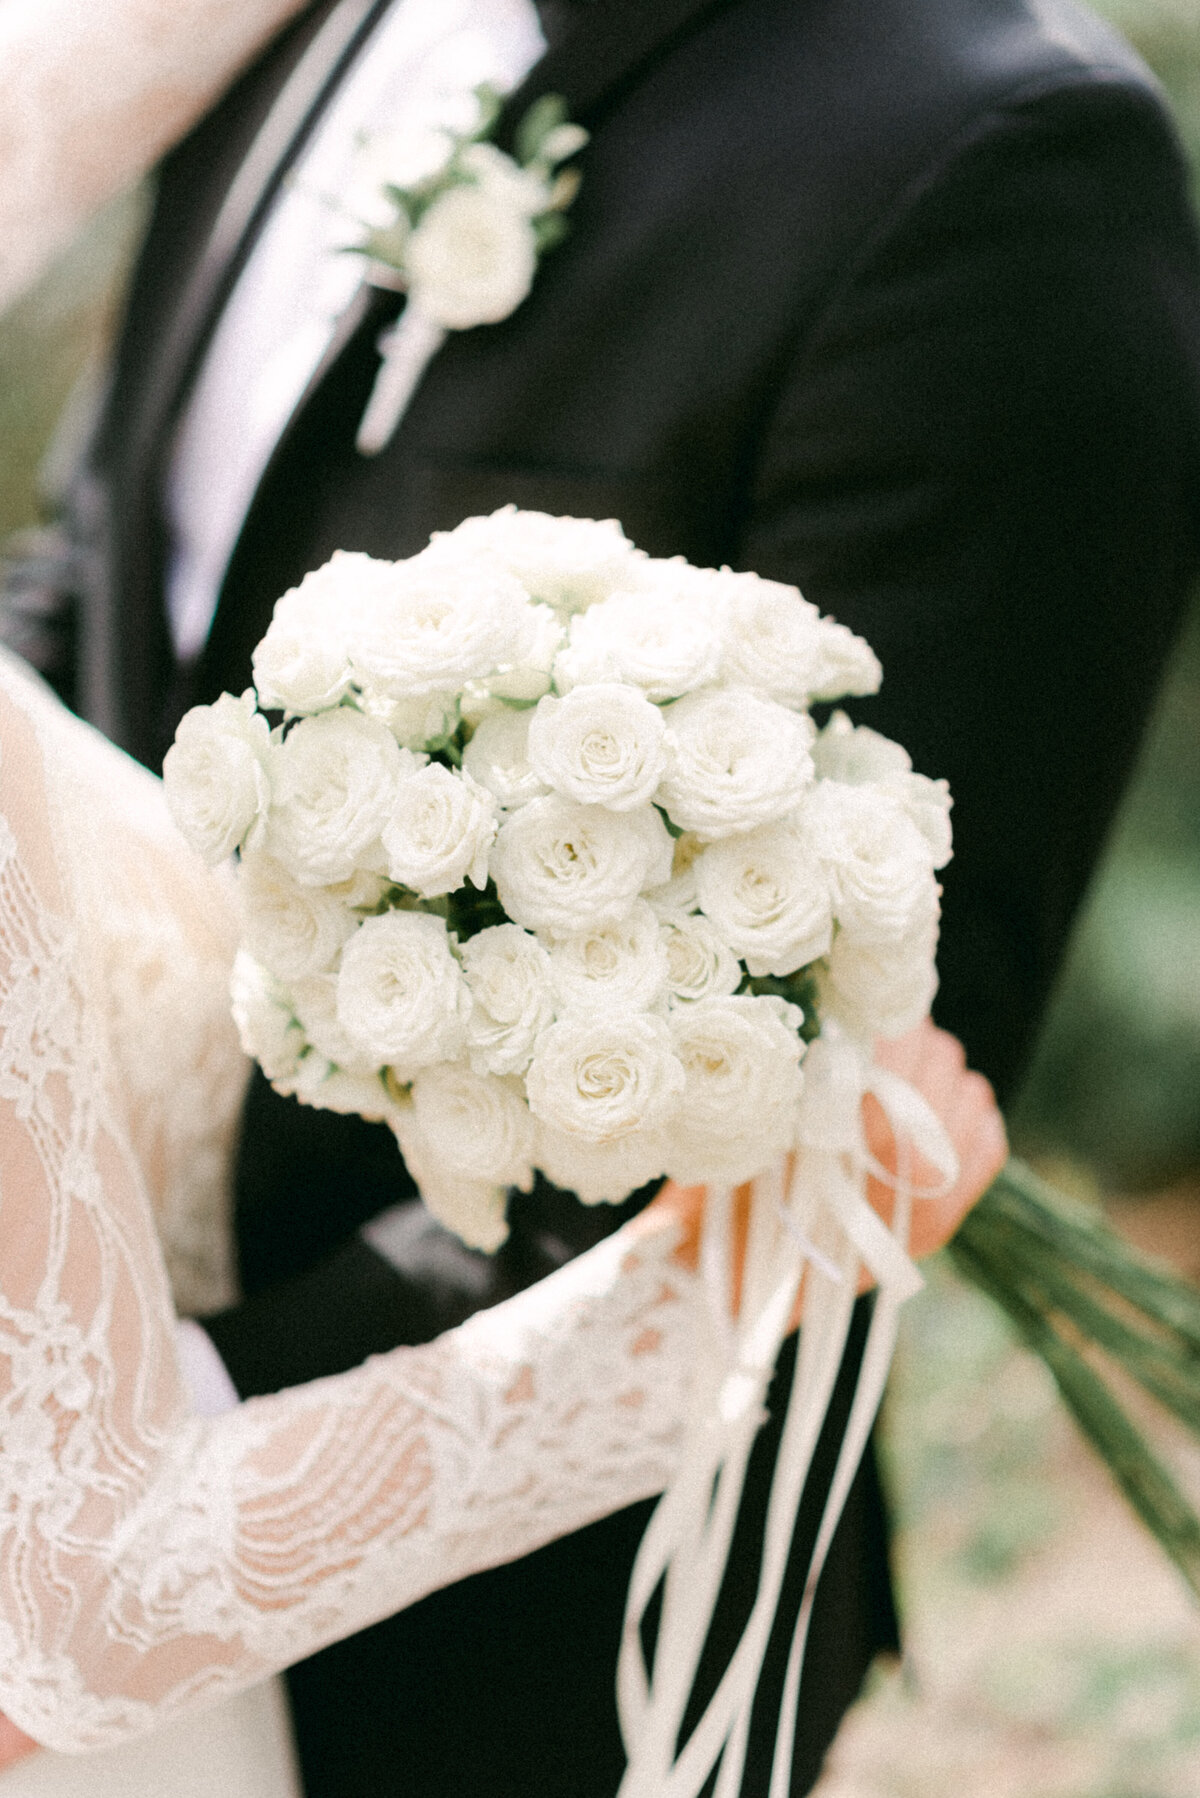 A close up image of a  bride holding a wedding bouquet of white roses  photographed by wedding photographer Hannika Gabrielsson.